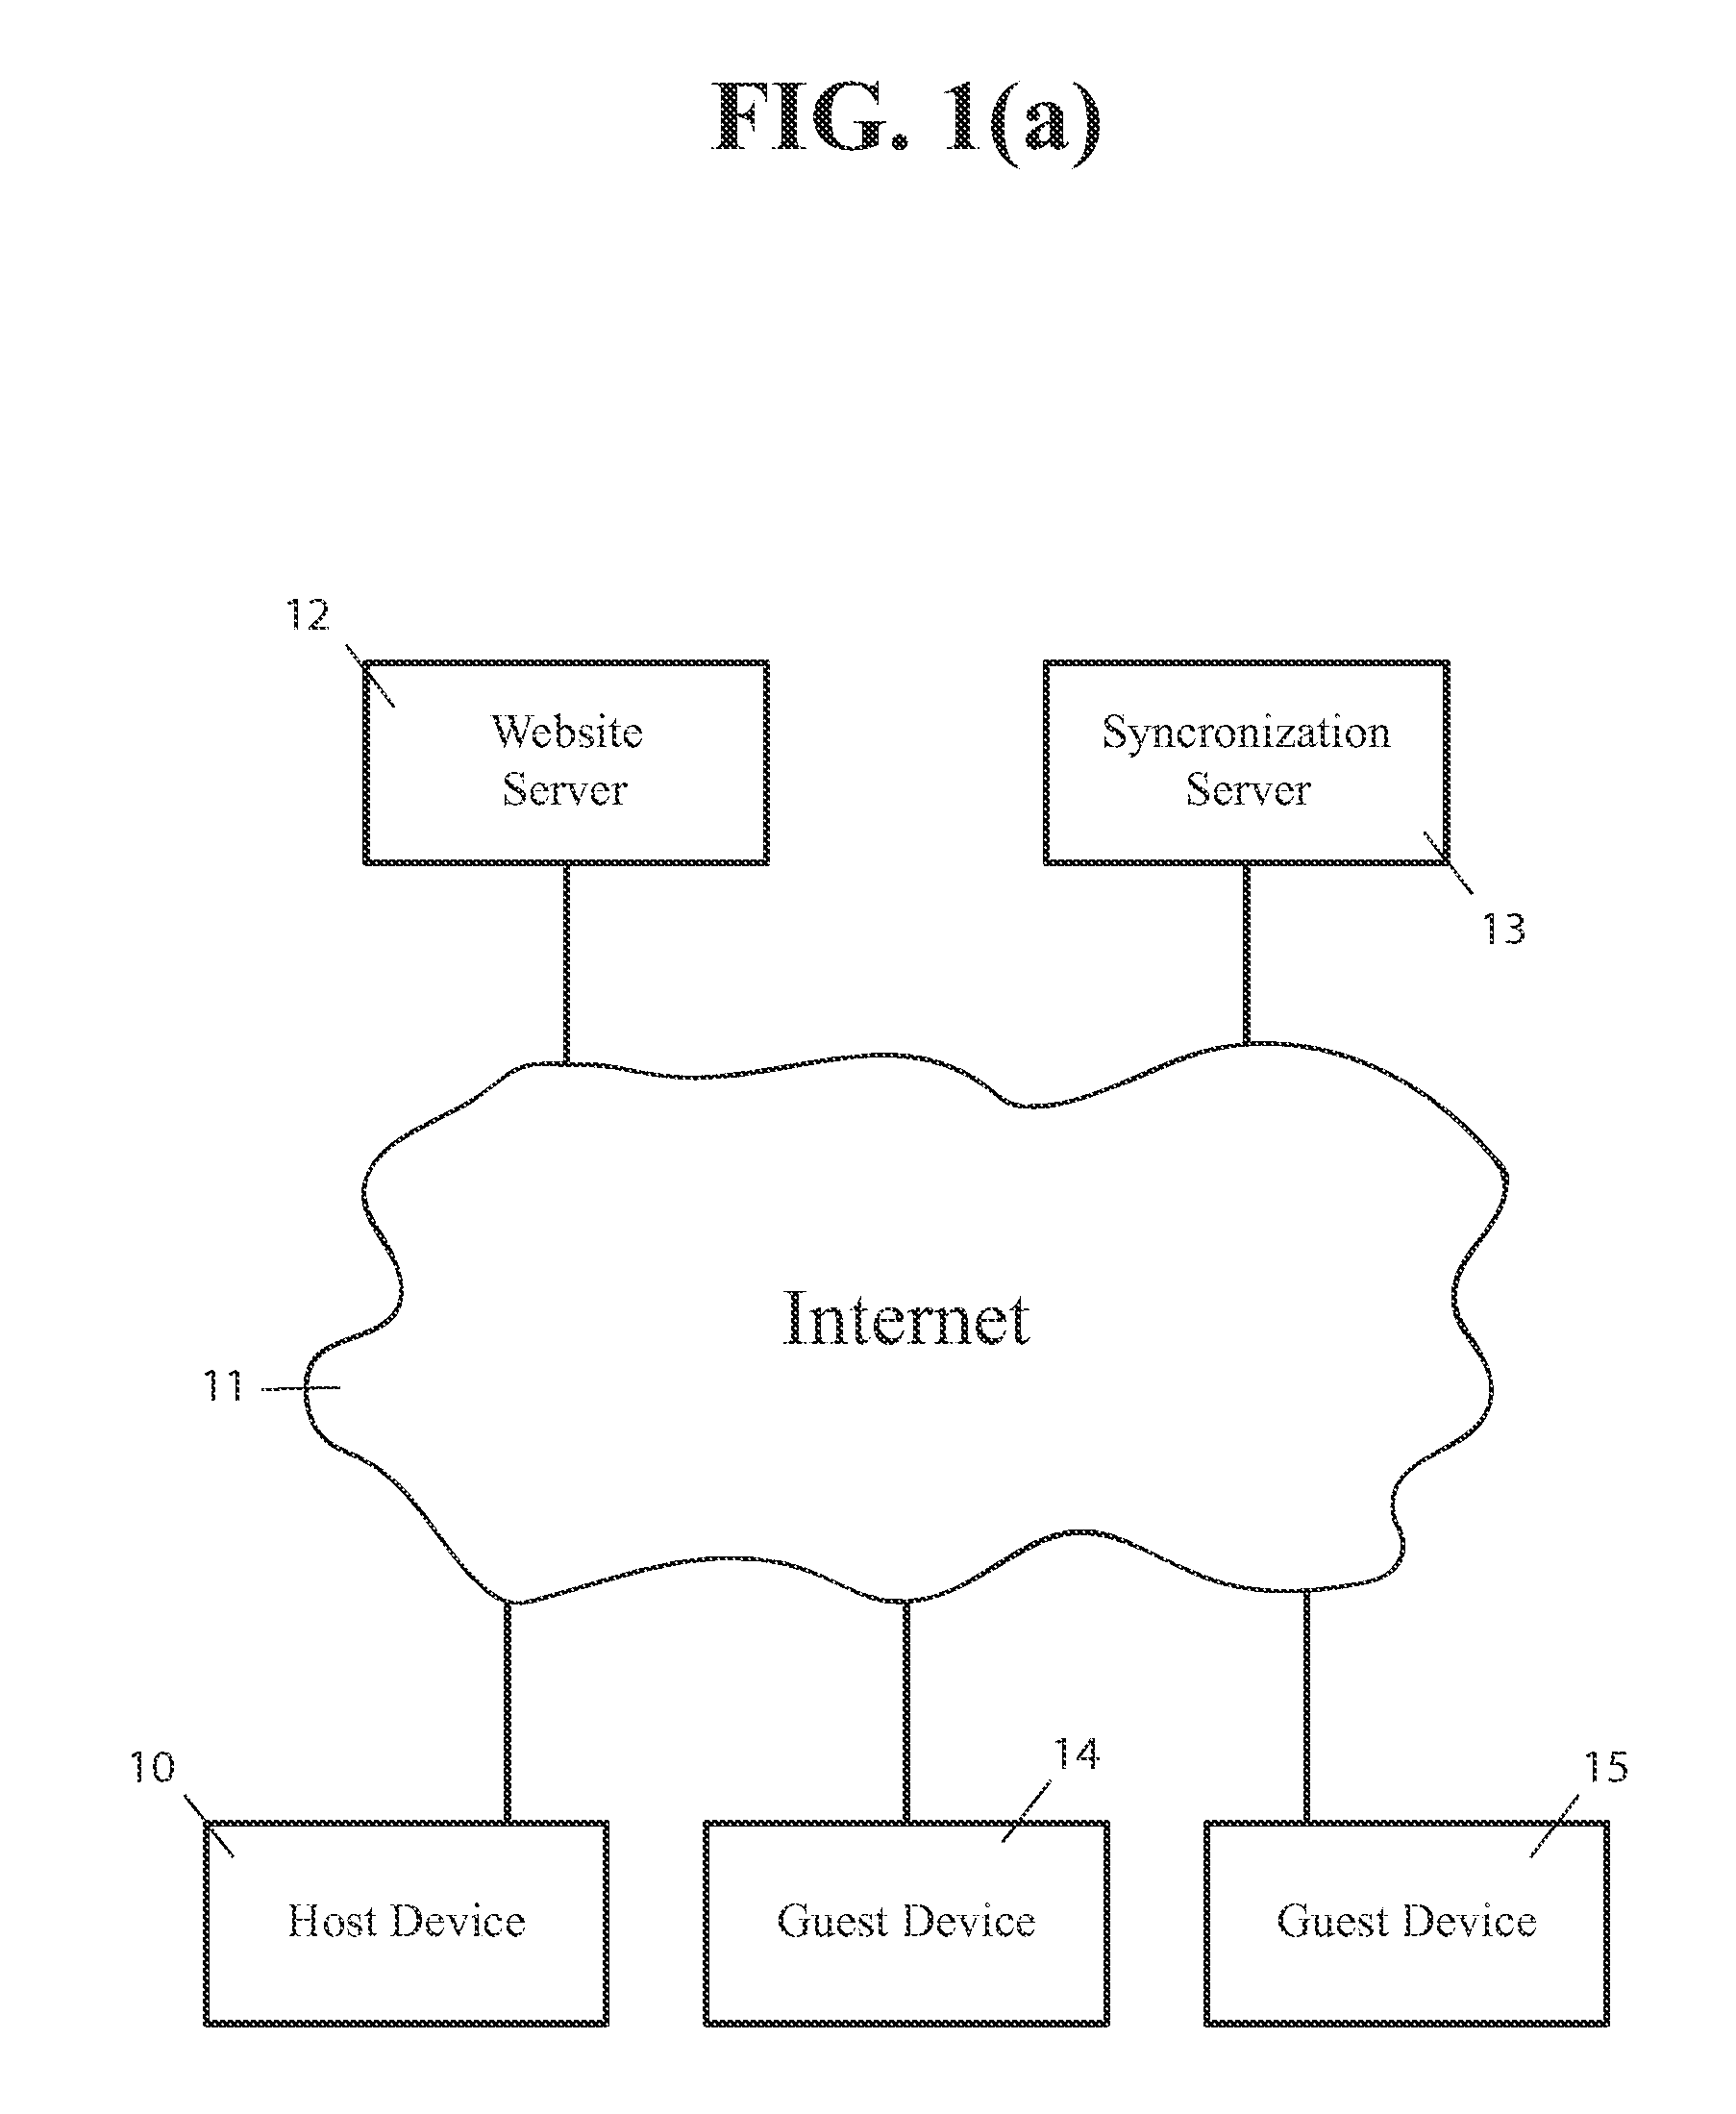 Method and Apparatus for the Implementation of a Real-Time, Sharable Browsing Experience